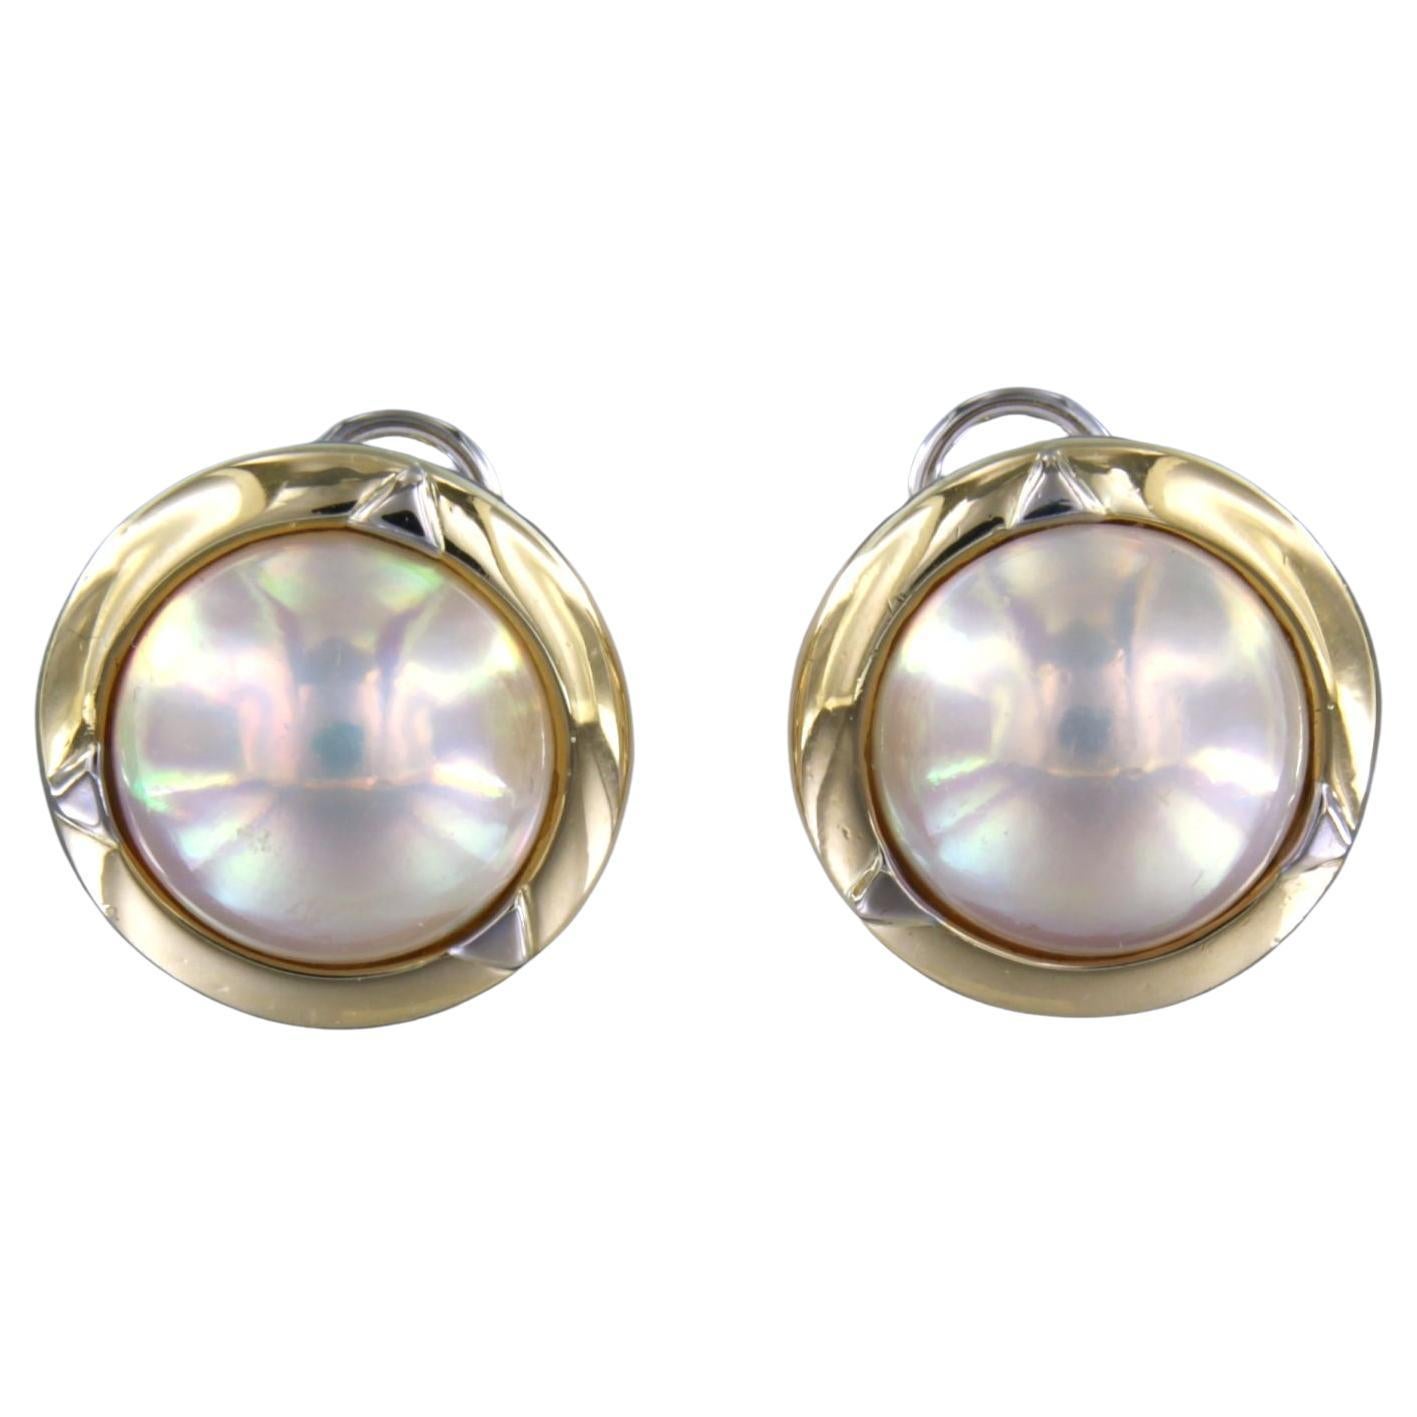 Earrings set with mabee pearl 18k yellow gold For Sale